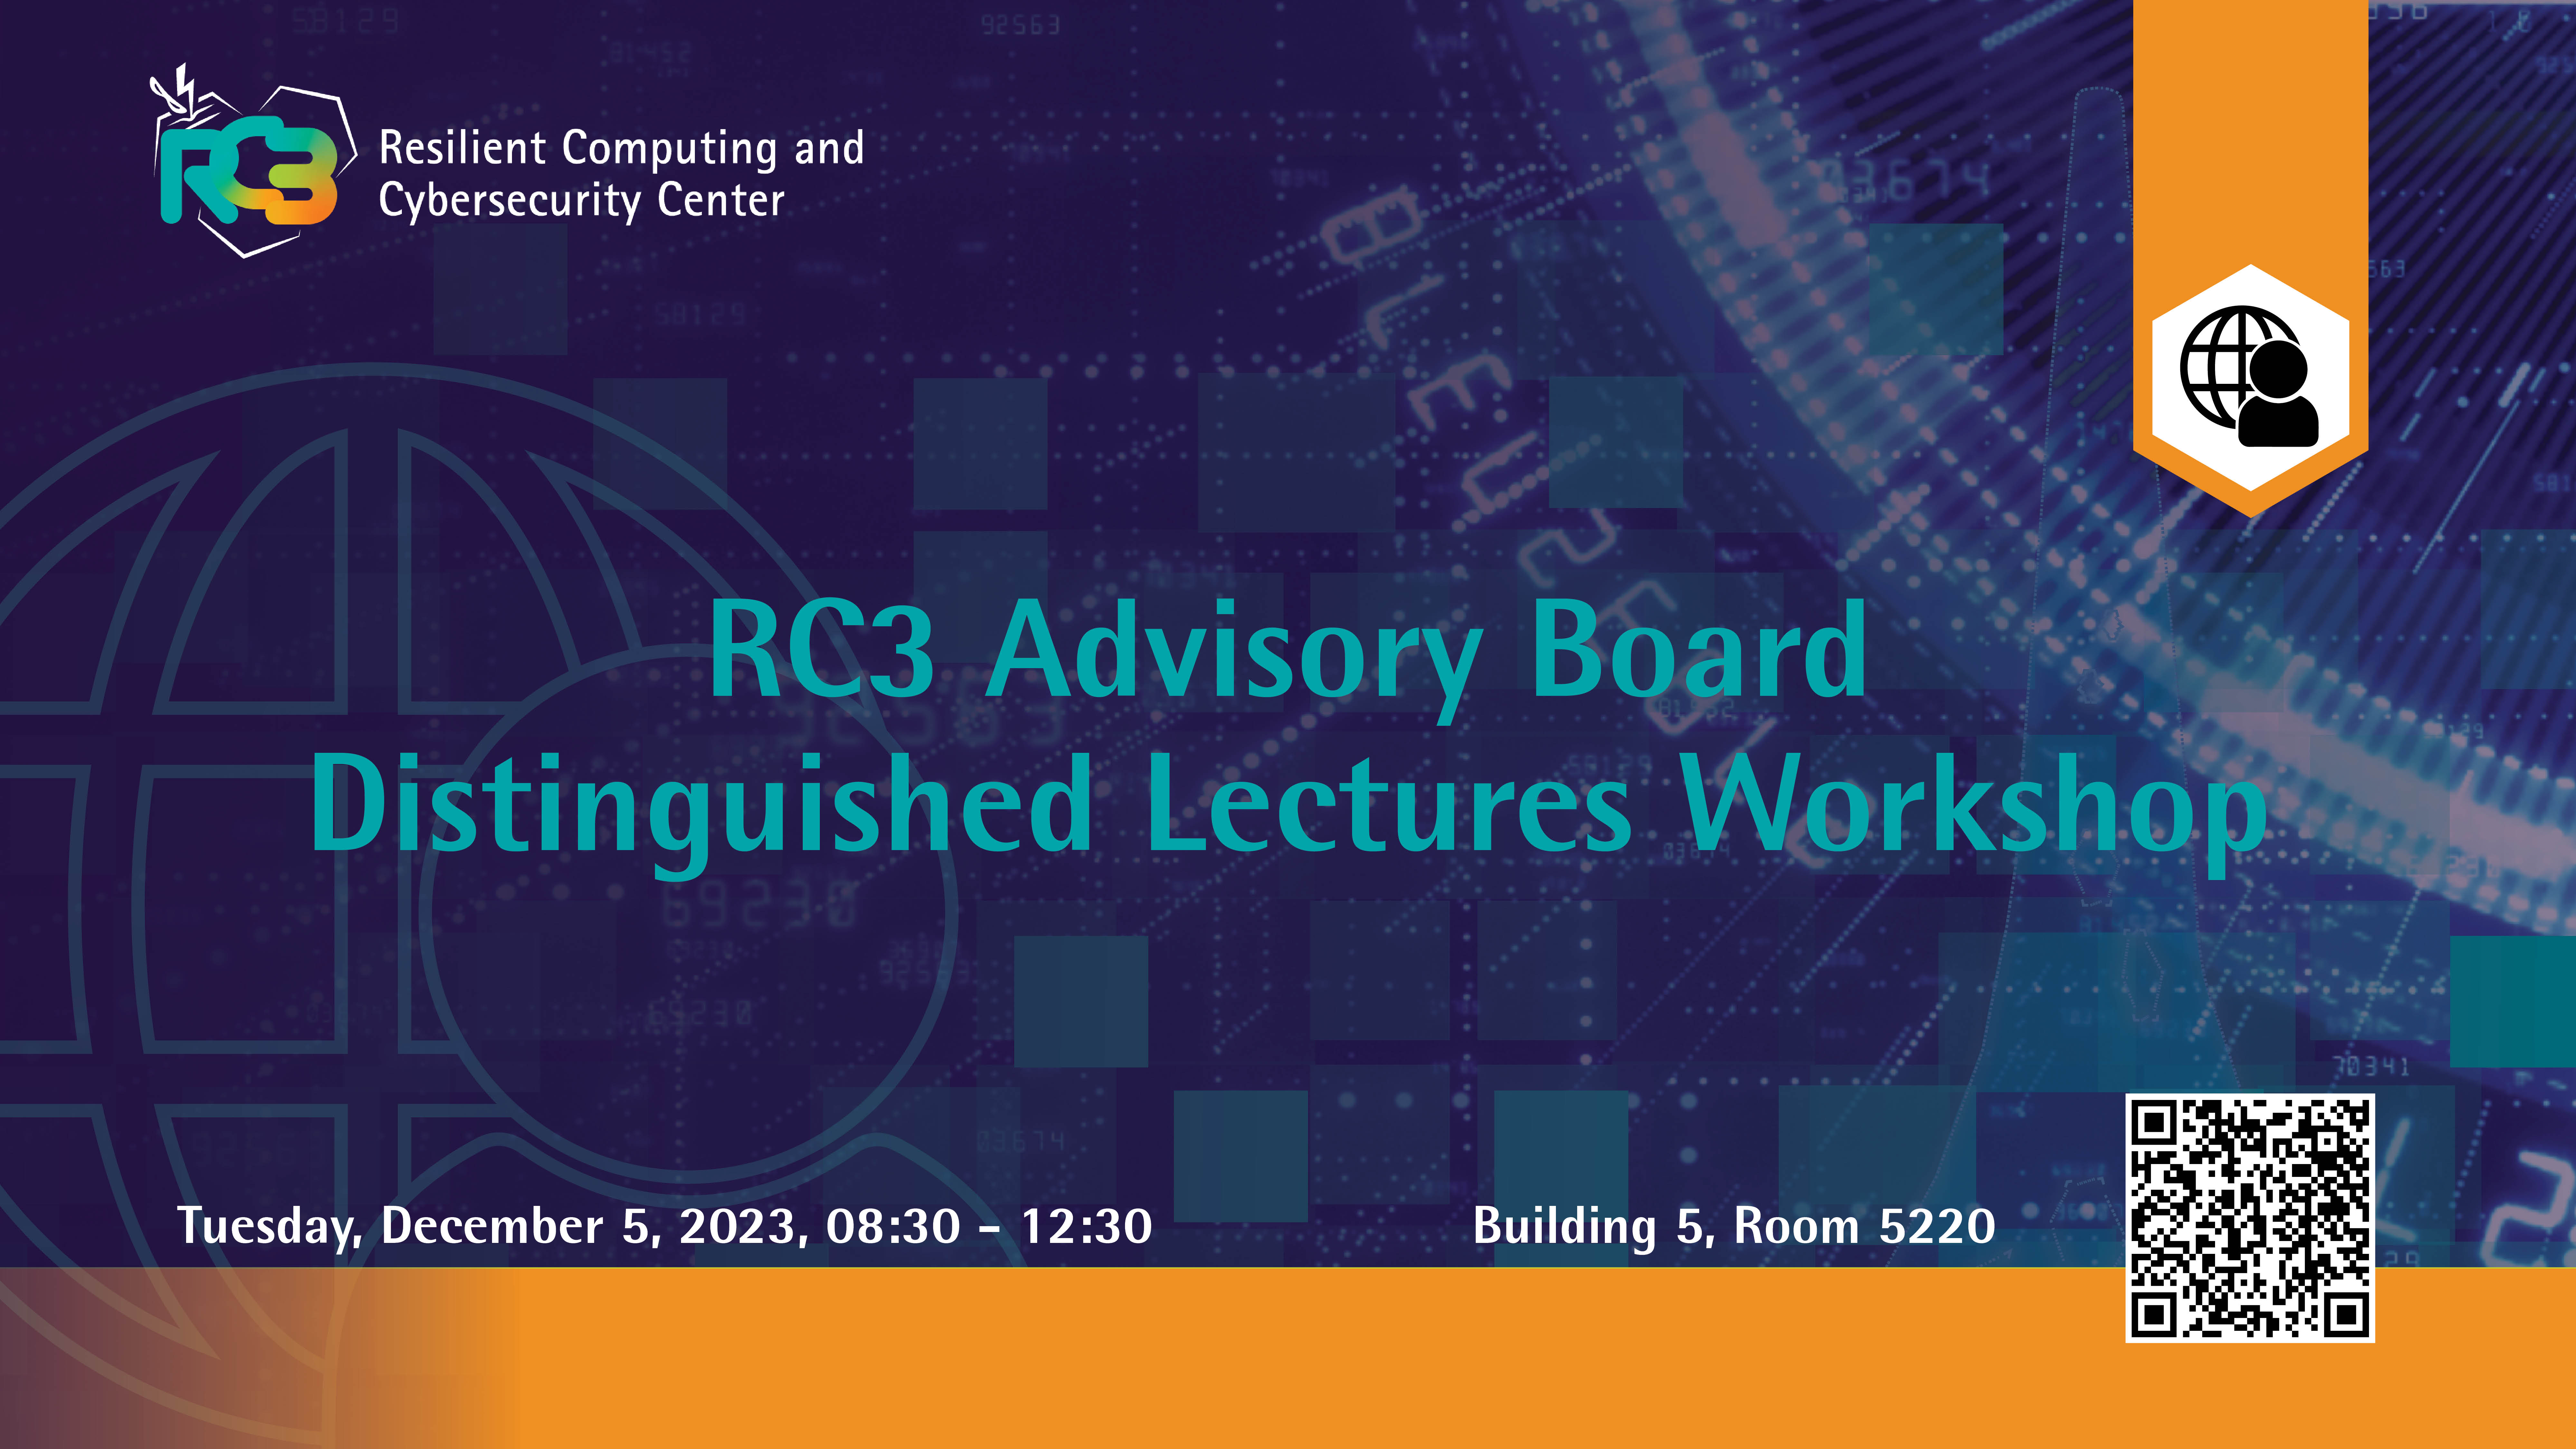 KAUST-CEMSE-RC3-Advisory-Board-Distinguished-Lectures-Workshop-2023